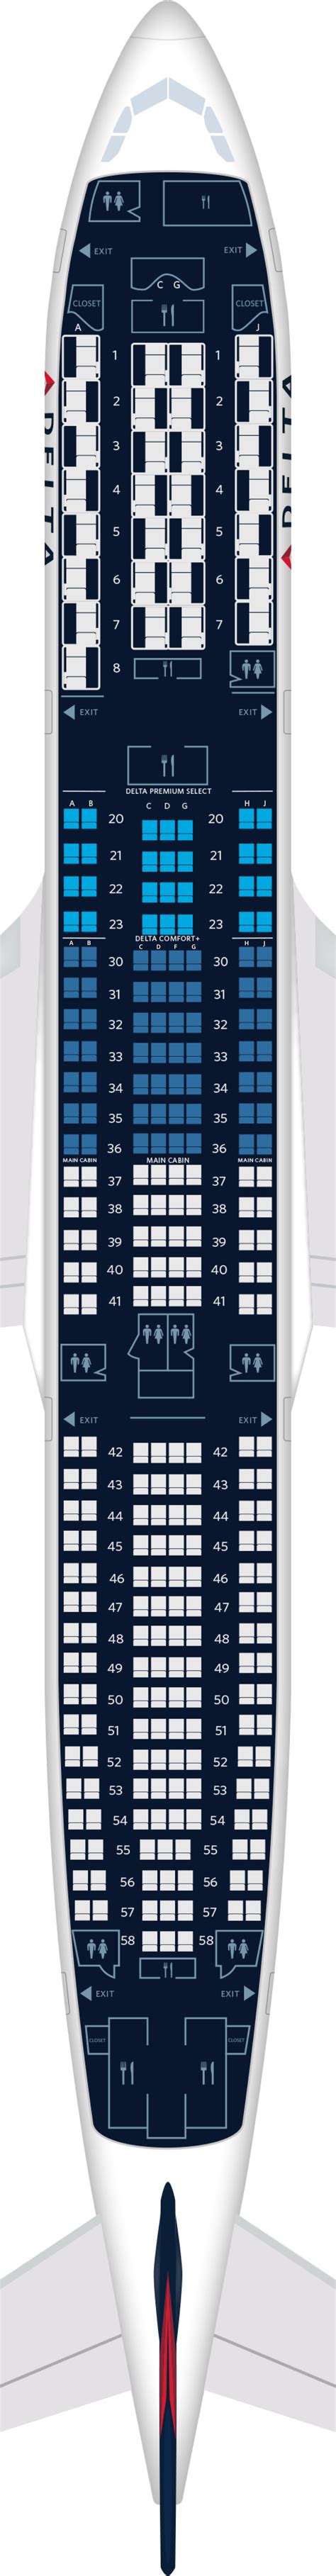 Airbus A Neo Seat Maps Specs Amenities Delta Air Lines